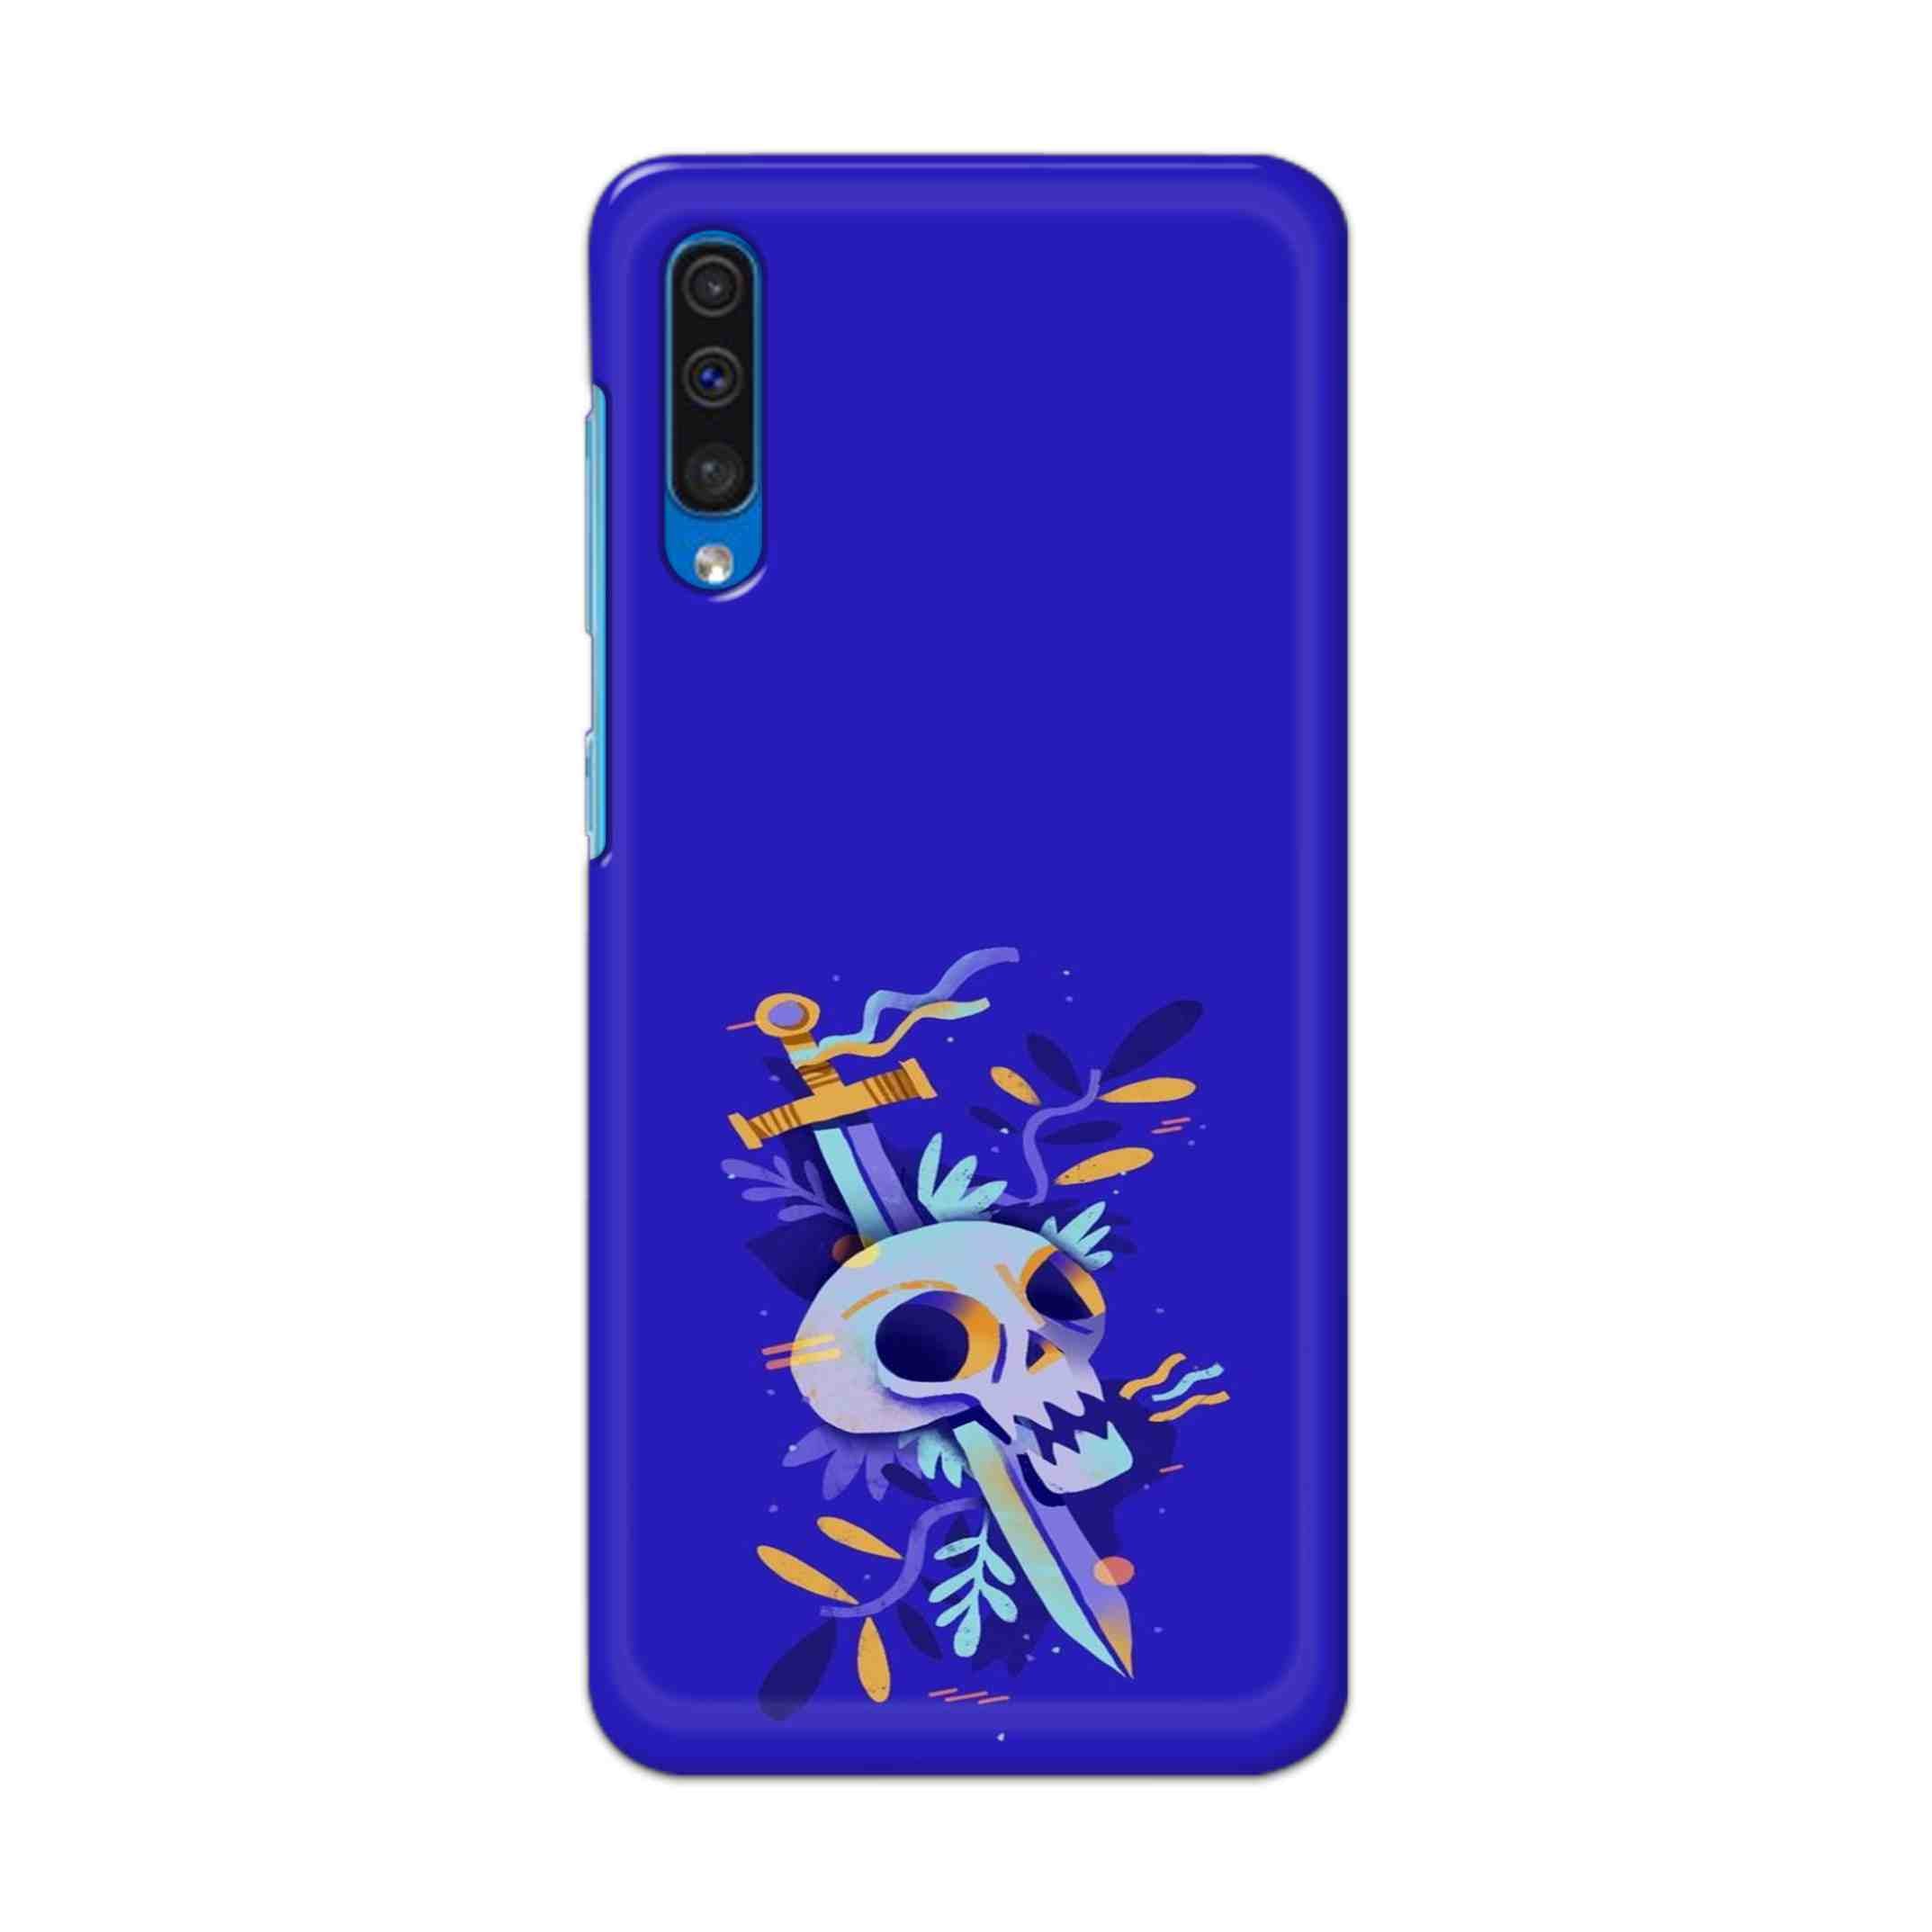 Buy Blue Skull Hard Back Mobile Phone Case Cover For Samsung Galaxy A50 / A50s / A30s Online